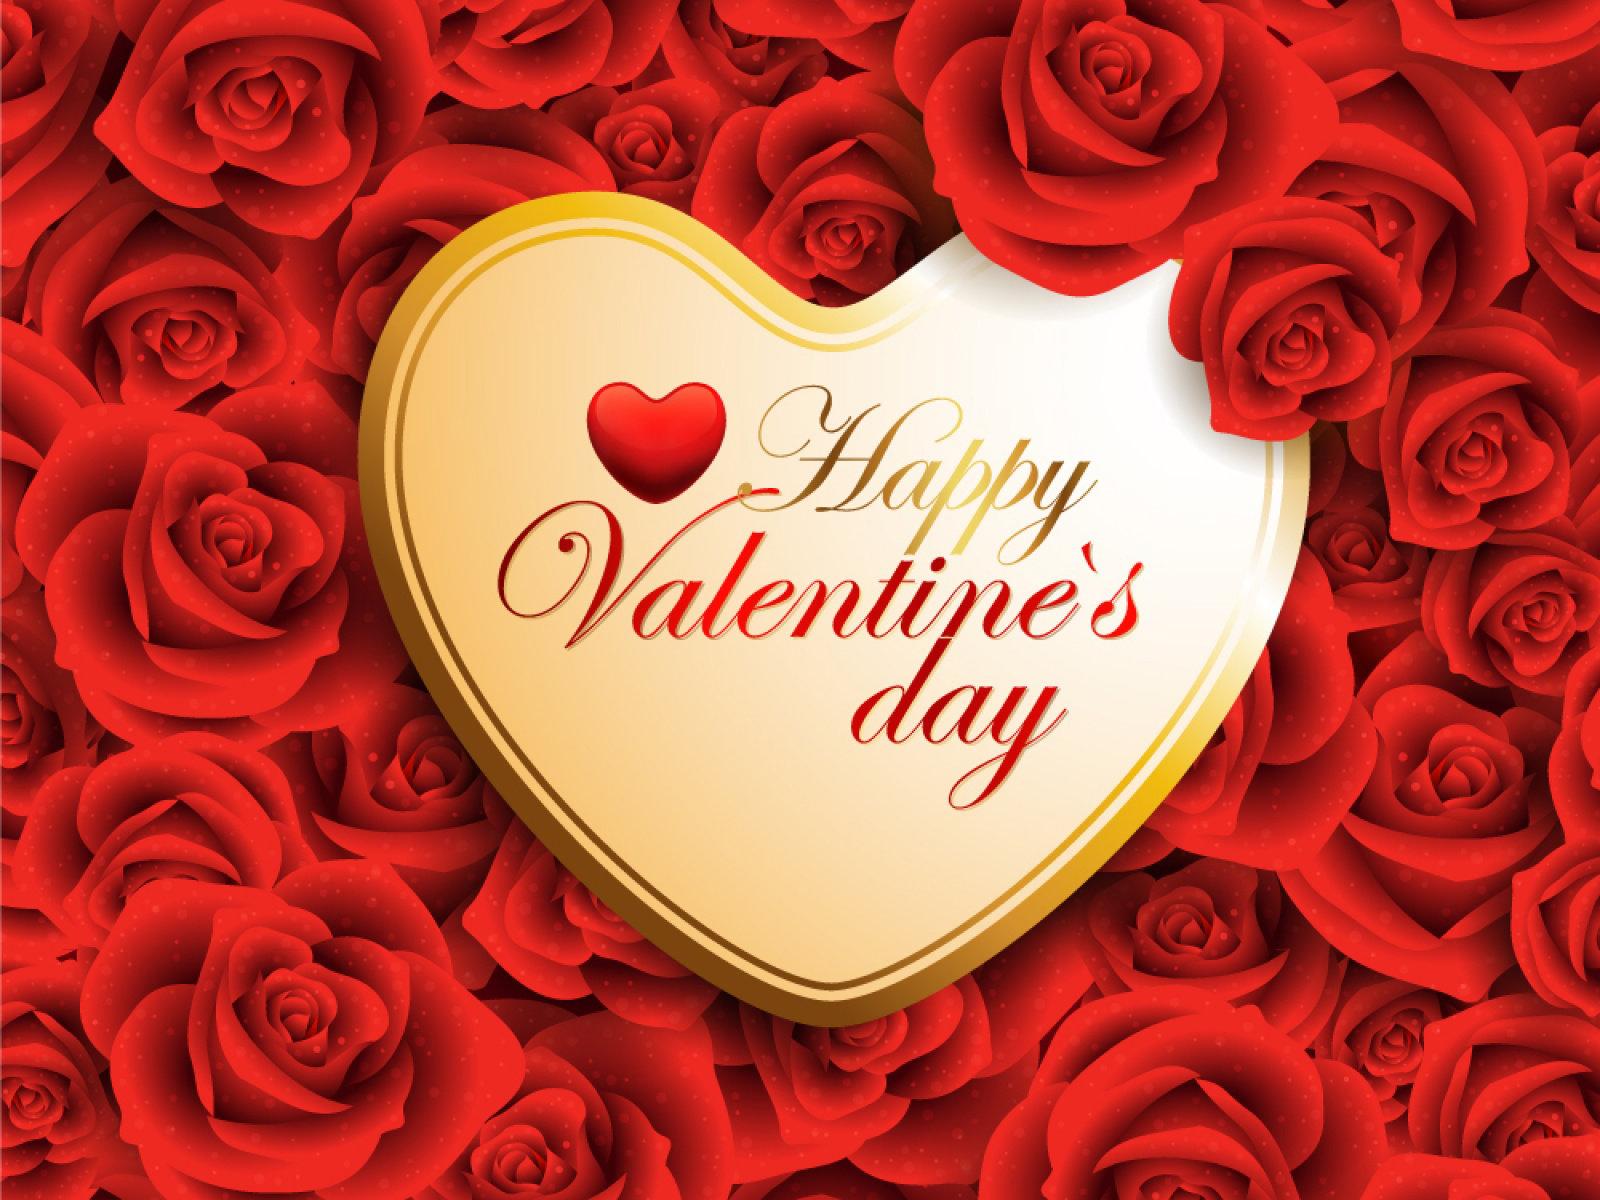 Happy Valentines Day 2020 Image HD Wallpaper For Facebook